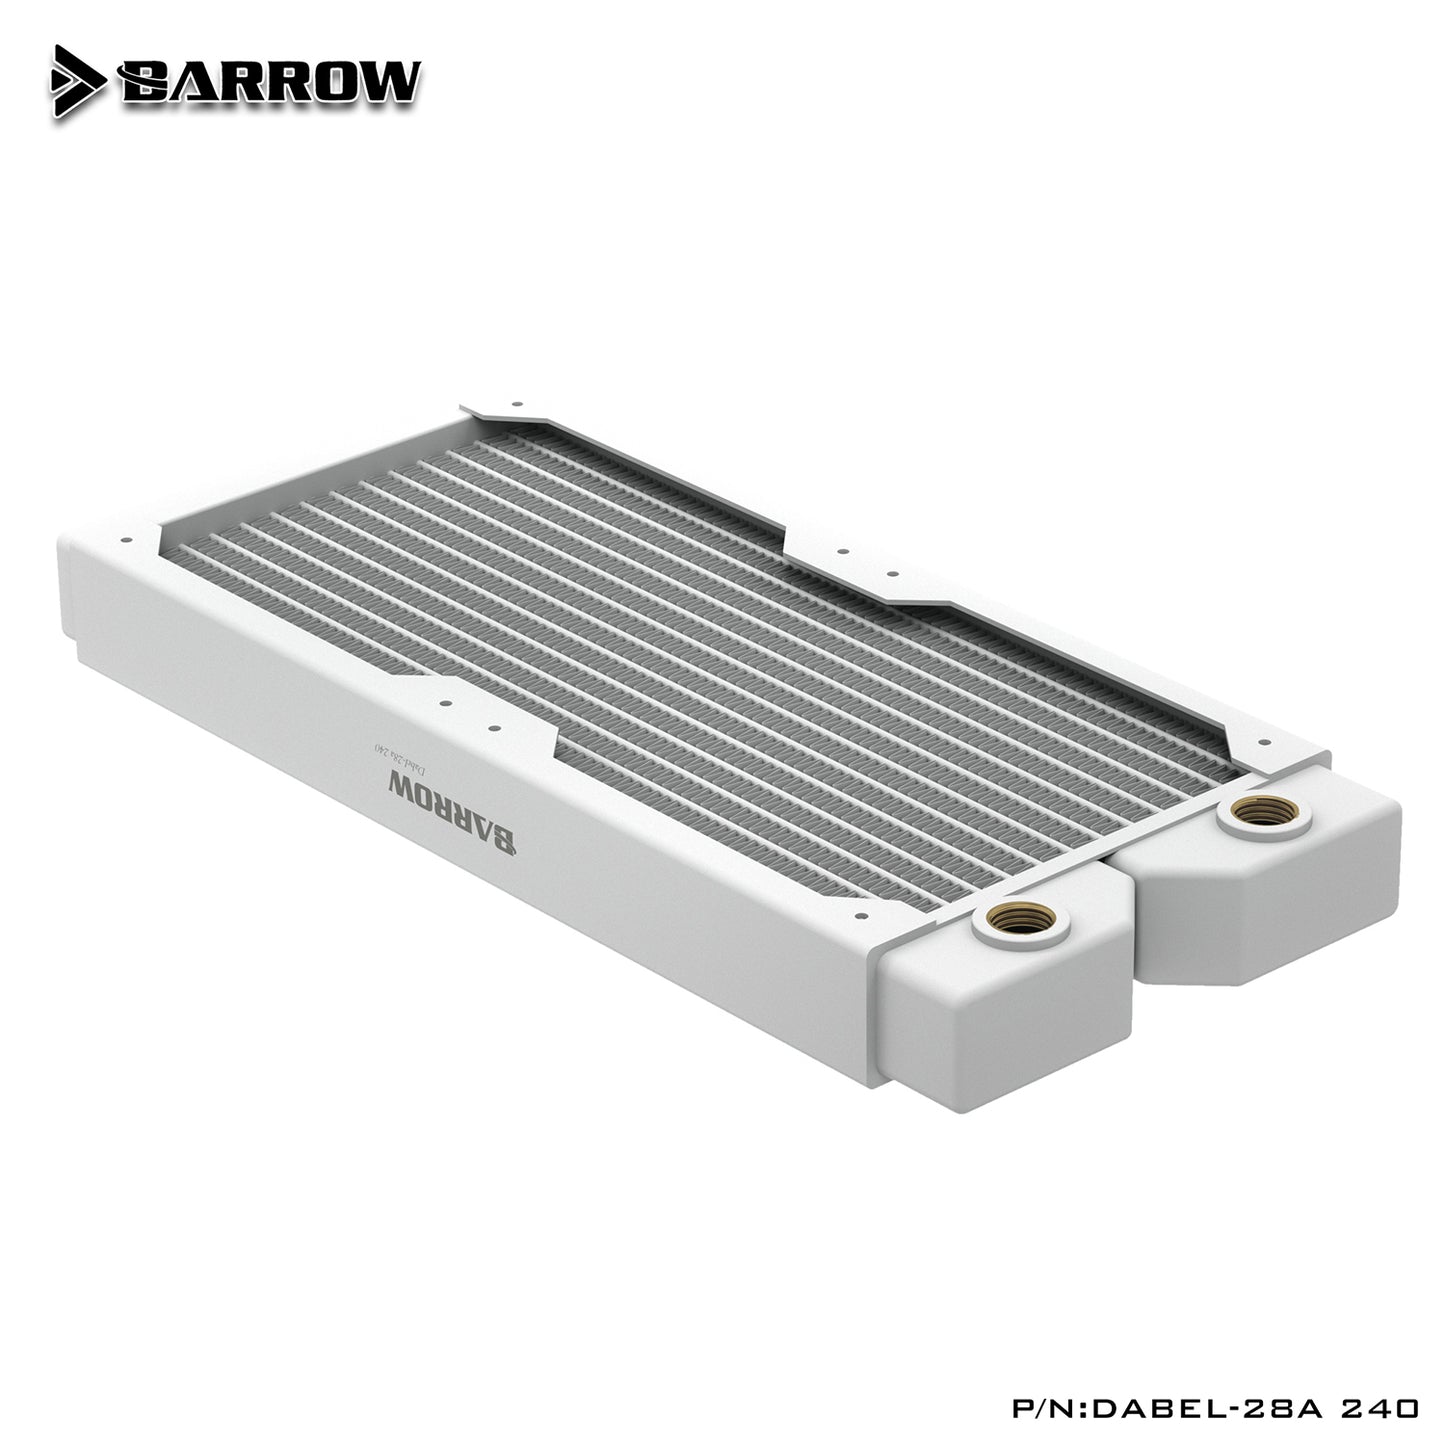 Barrow 120/240/360/480 Red Copper Radiator, Black/White 28mm Thickness G1/4" Thread High-density Revolving Heat Dissipation Passageway Radiator, For Water Cooling System, Dabel-28b Dabel-28a